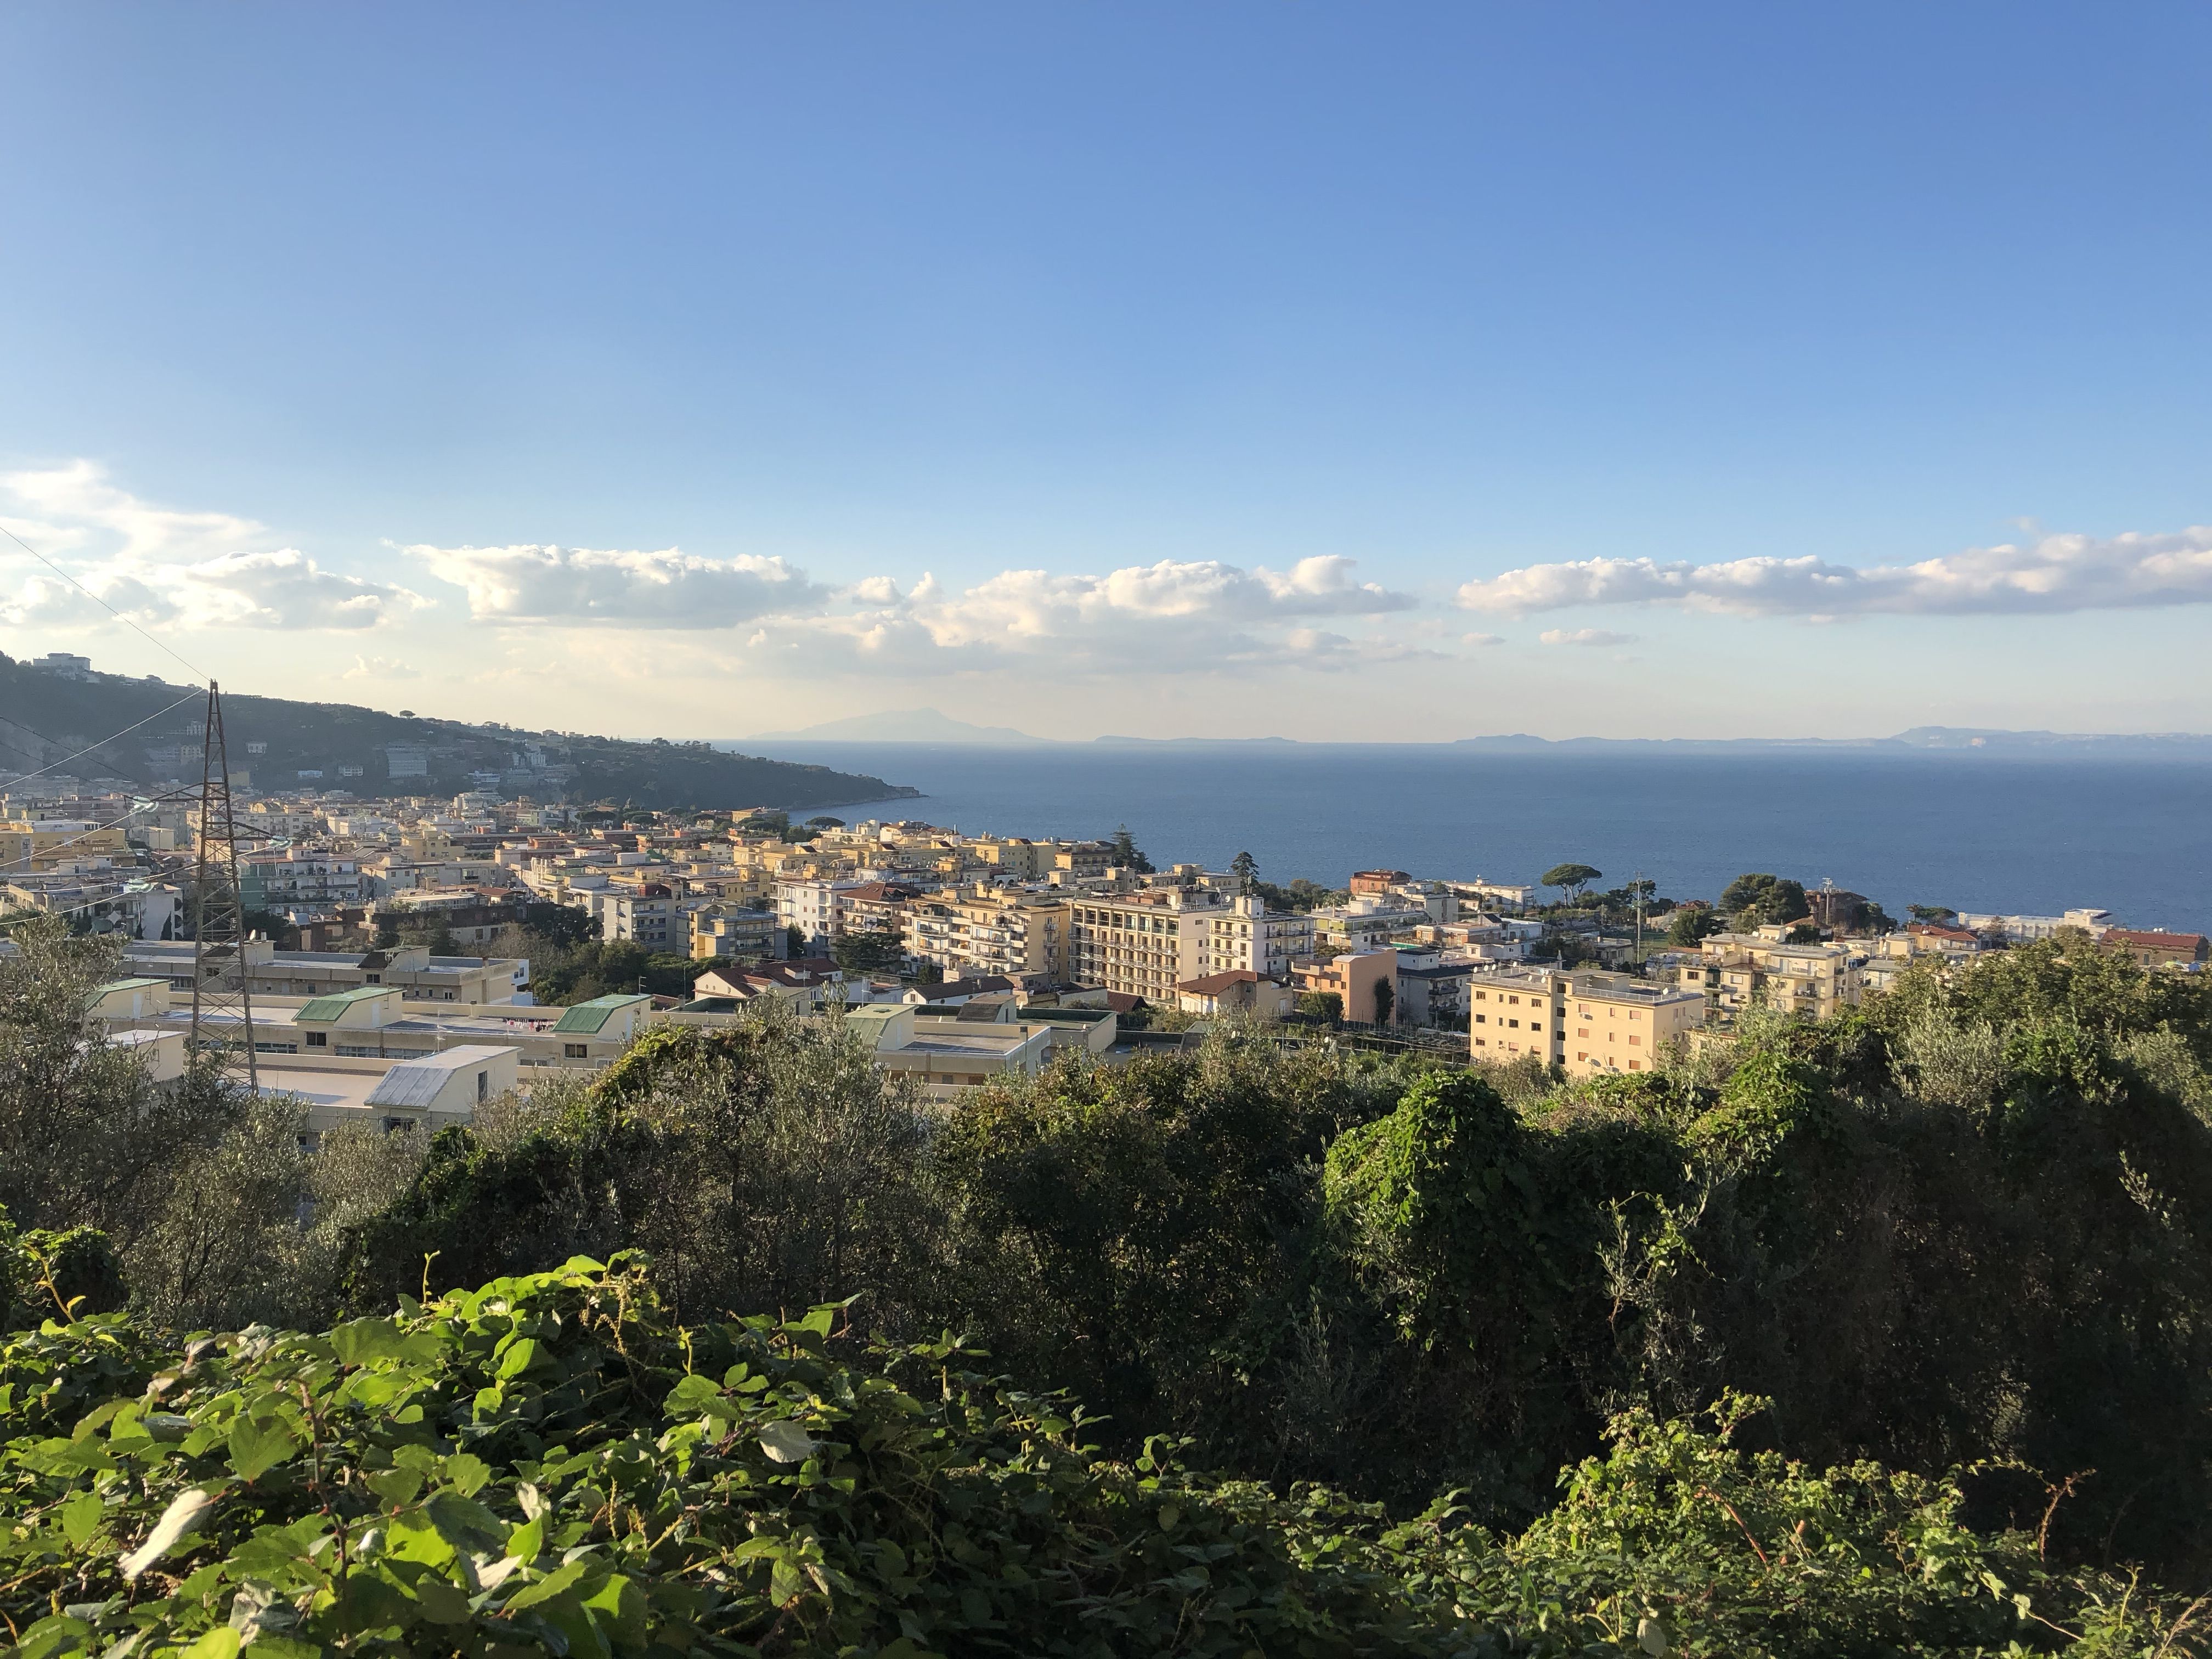 Looking down on Sorrento from a hill on a sunny day.  In the foreground, the tops of trees; behind and below  all of Sorrento's buildings — hotels and apartment blocks clustered together; beyond them, the blue water of the Bay of Naples.